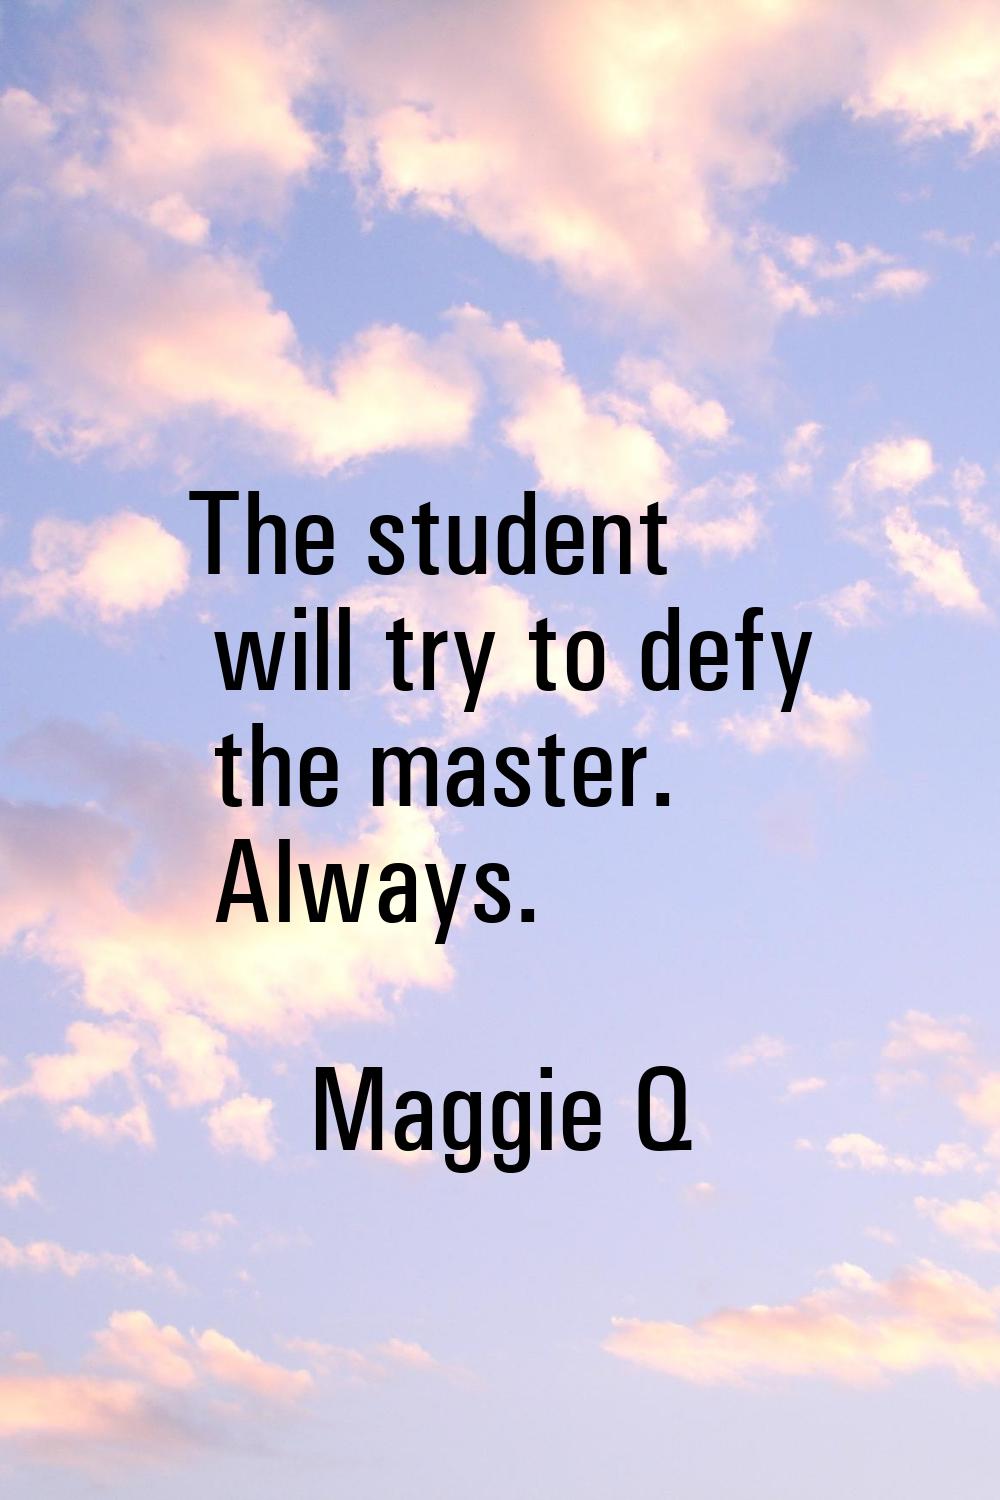 The student will try to defy the master. Always.